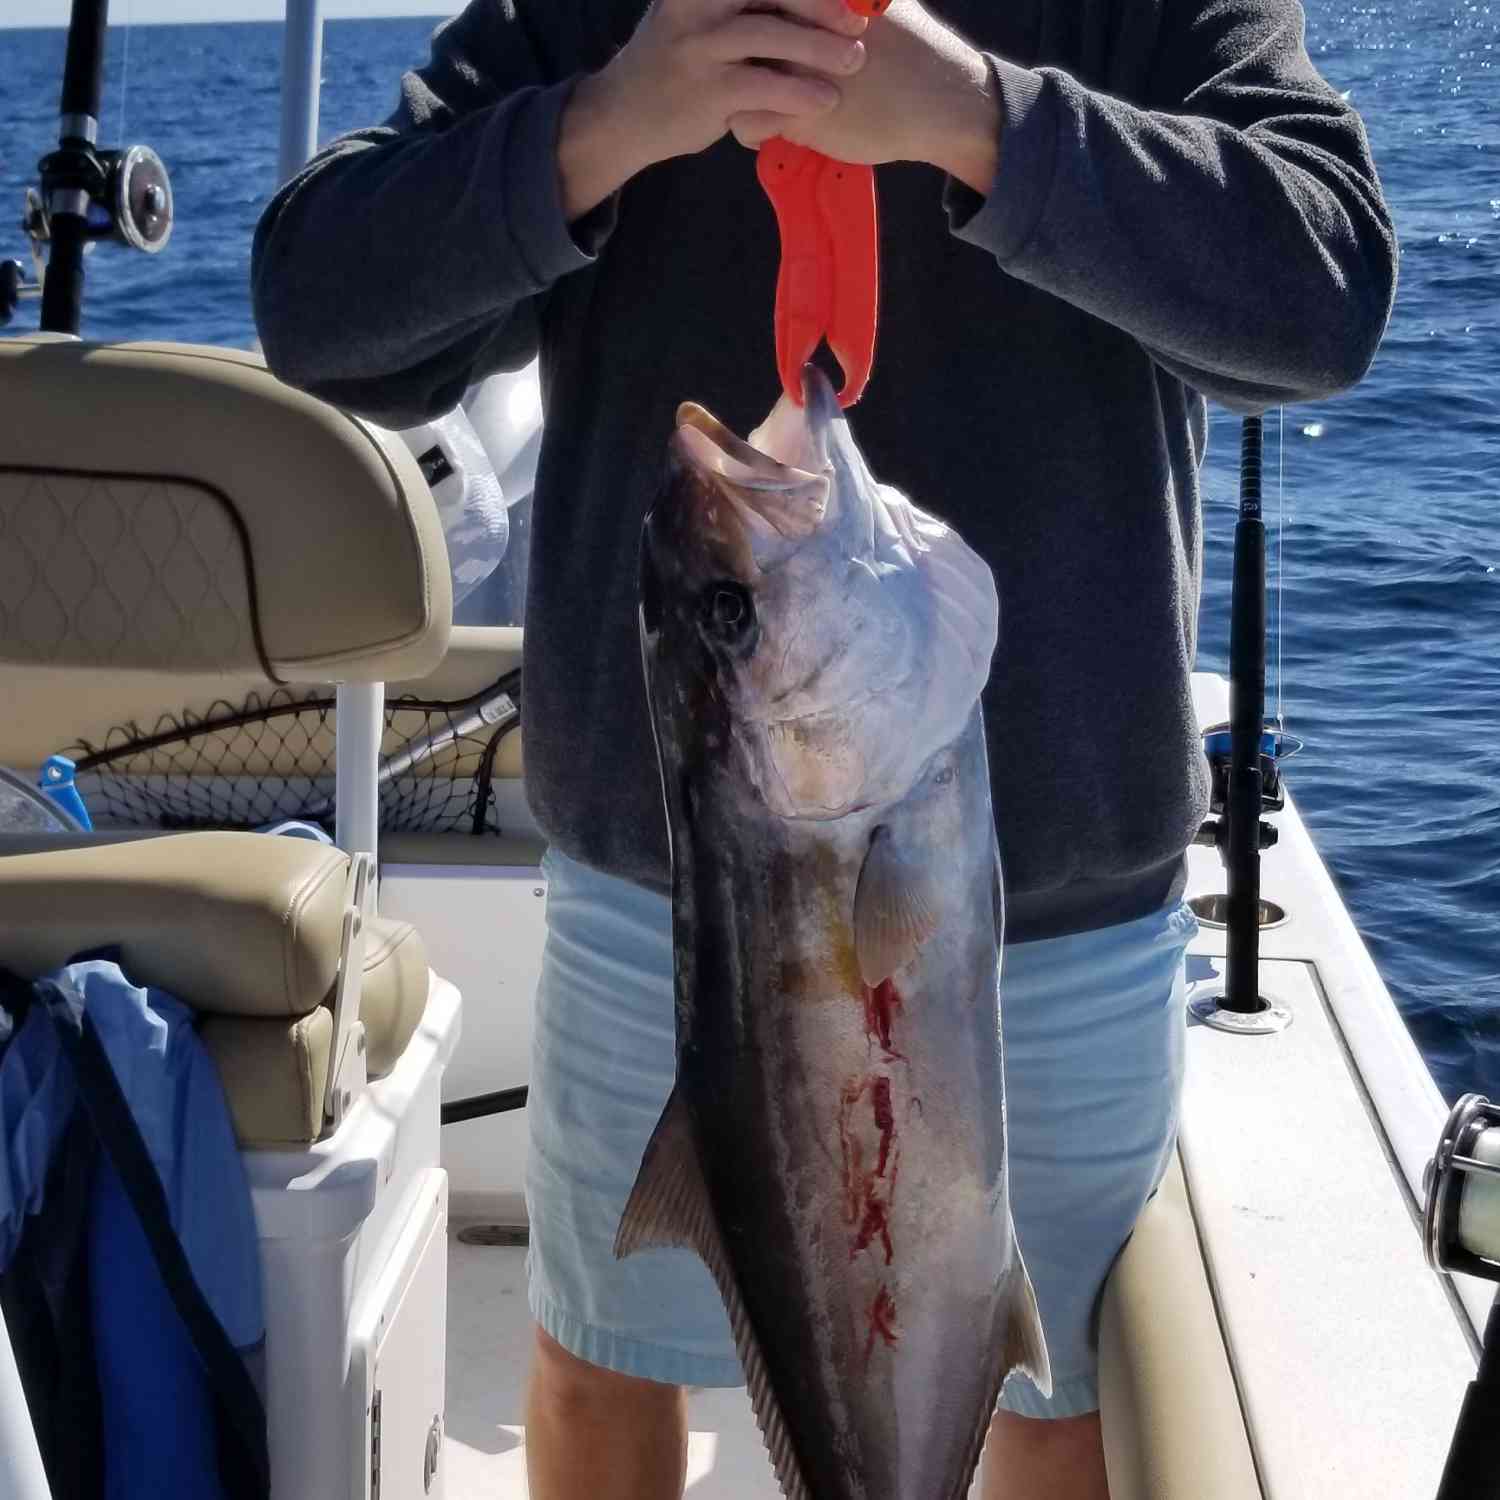 Title: Amberjack Slayer - On board their Sportsman Open 242 Center Console - Location: Pensacola, Florida. Participating in the Photo Contest #SportsmanMay2019